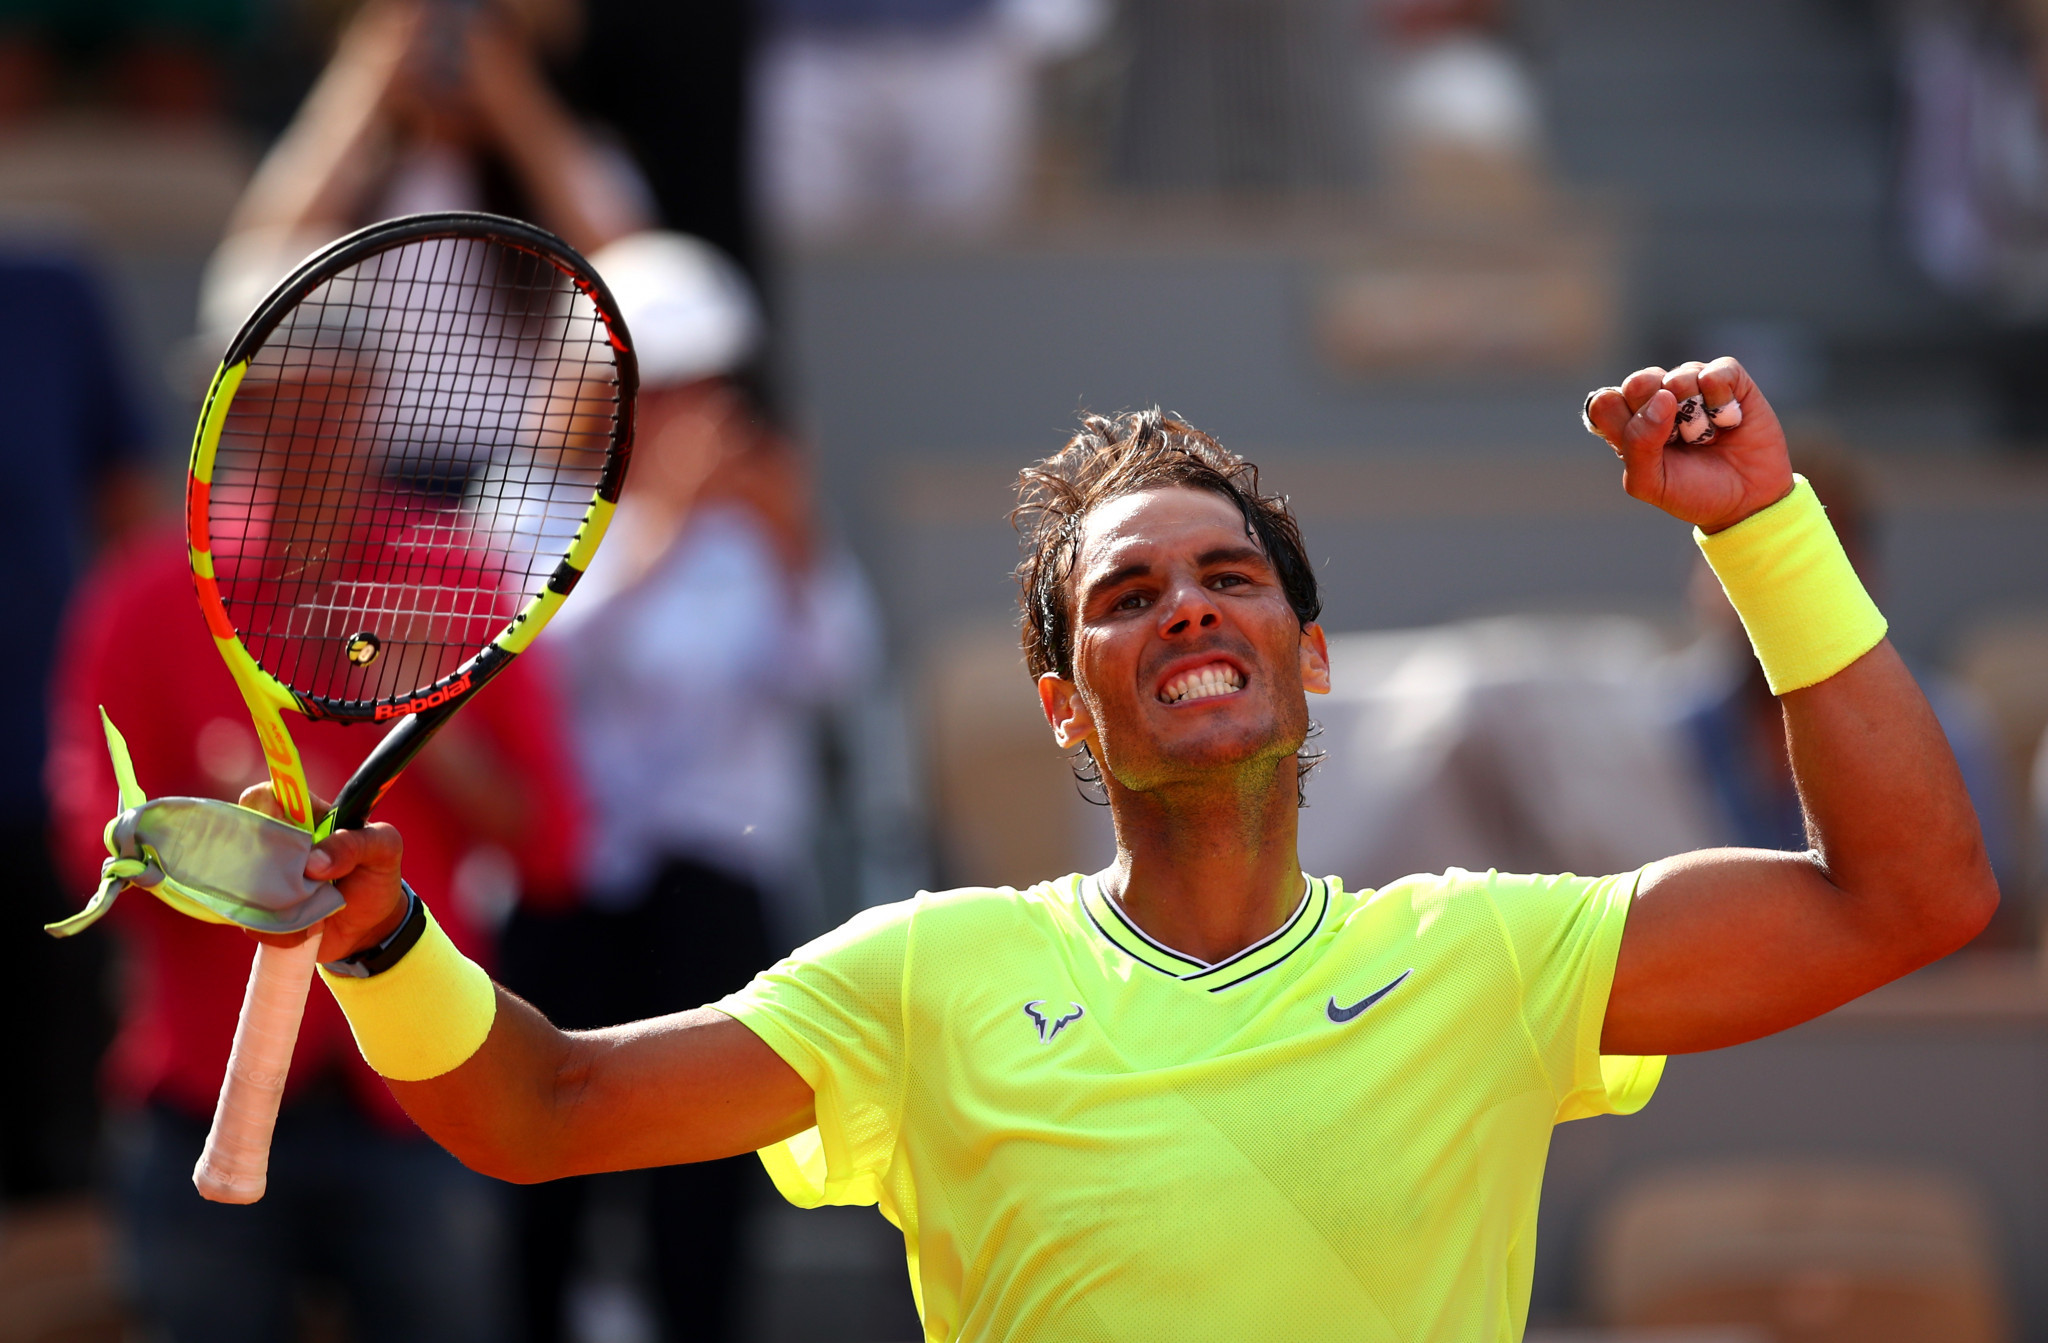 Smiles all round for Spaniard Nadal as he cruises into French Open last ...